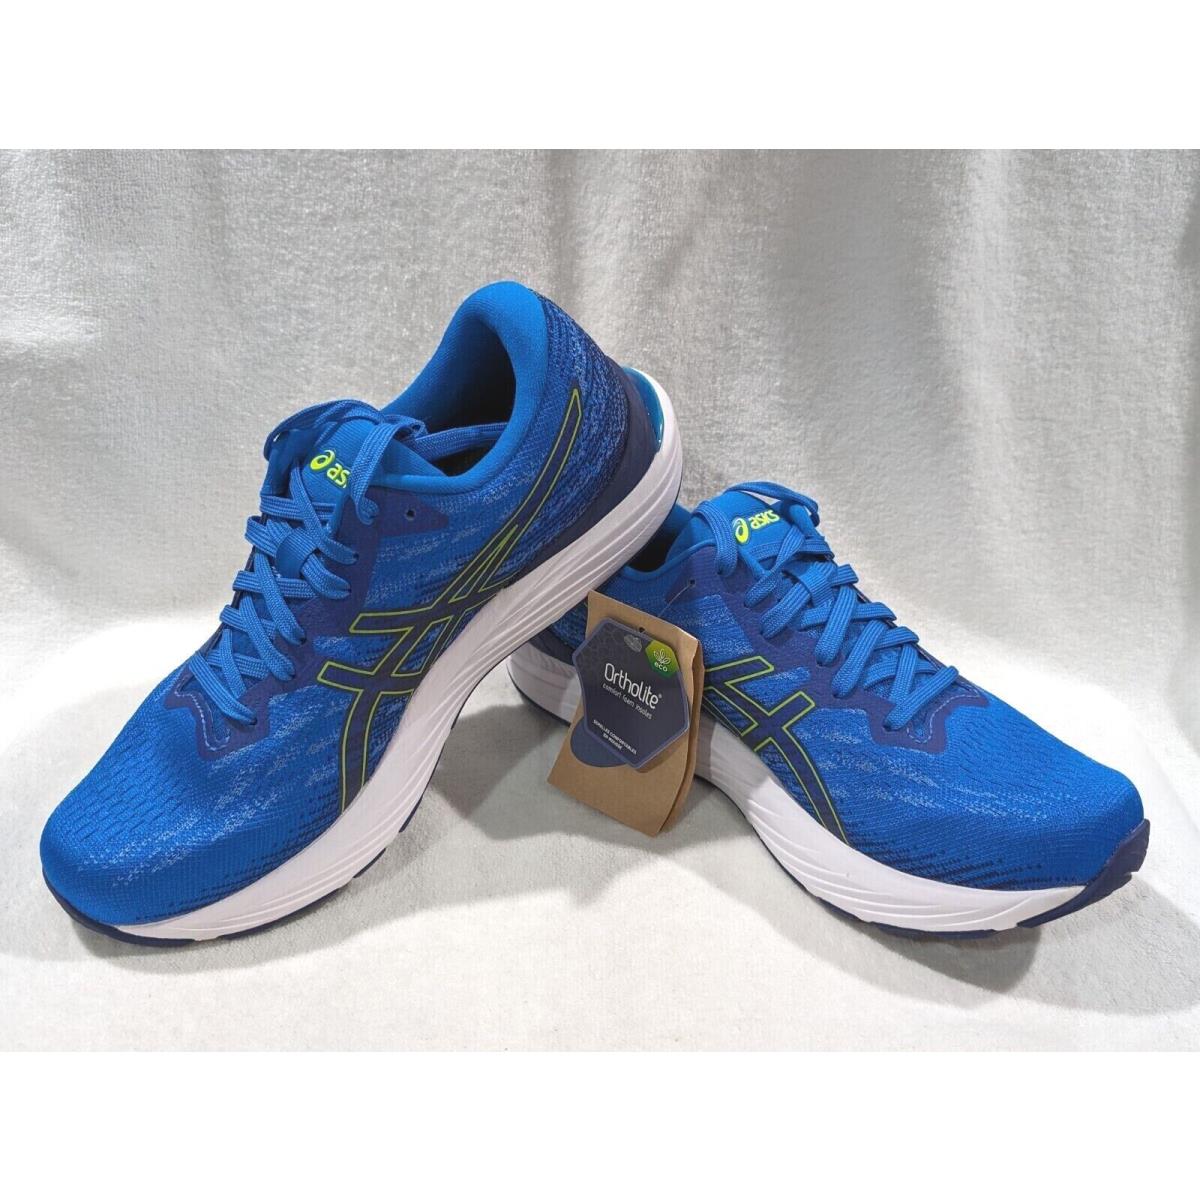 Asics Men`s Gel-stratus 3 Knit Electric Blue/s-yellow Running Shoes-size 8.5